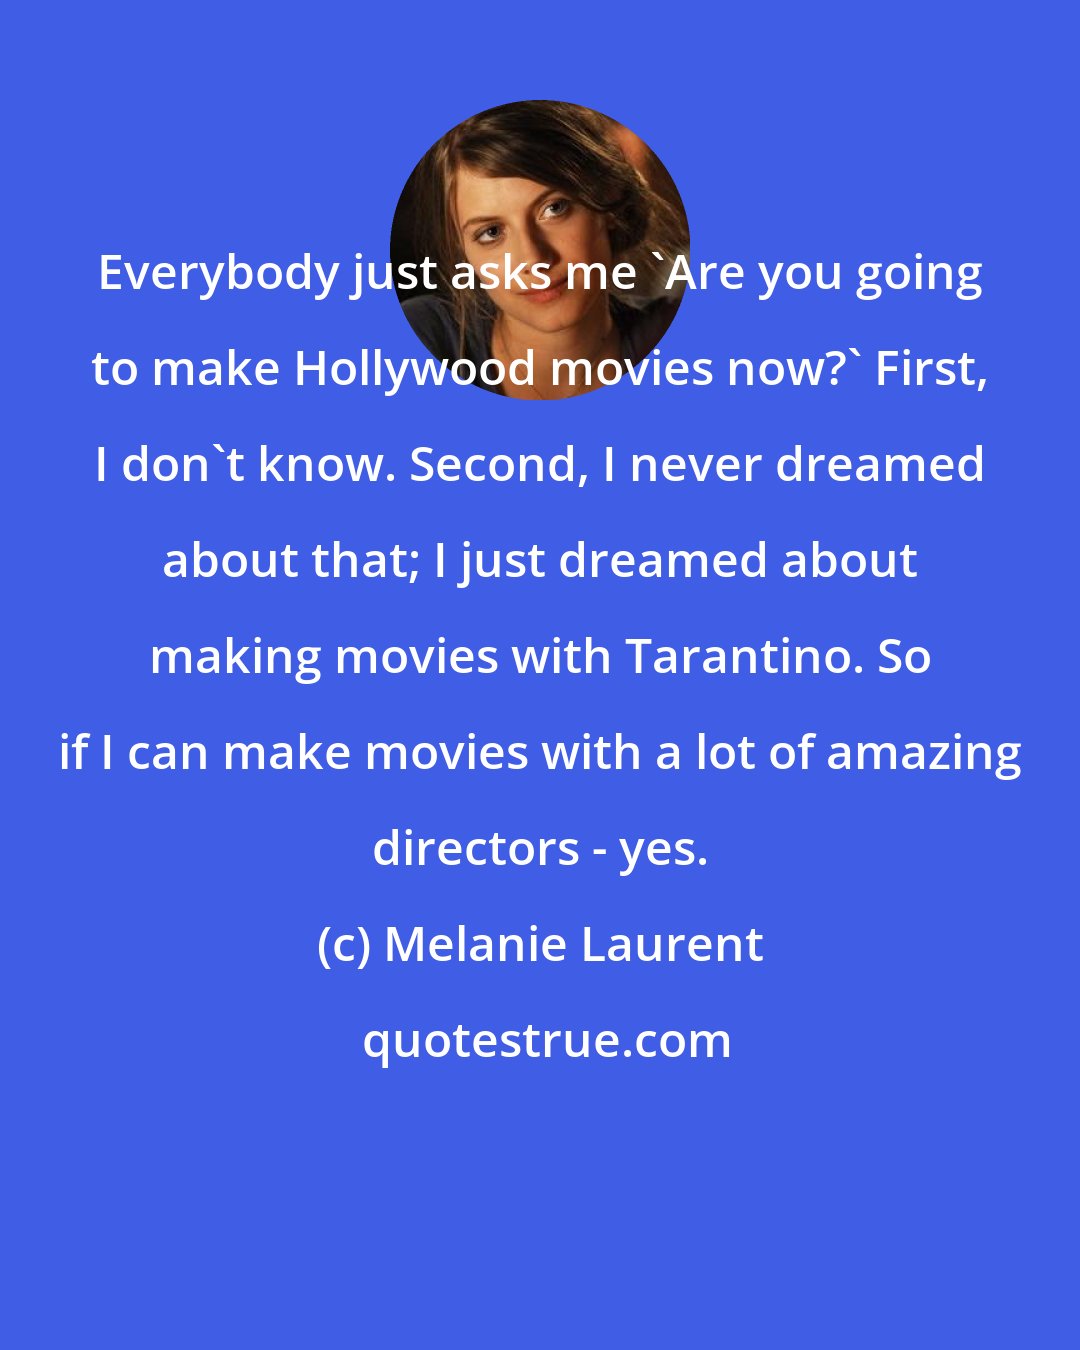 Melanie Laurent: Everybody just asks me 'Are you going to make Hollywood movies now?' First, I don't know. Second, I never dreamed about that; I just dreamed about making movies with Tarantino. So if I can make movies with a lot of amazing directors - yes.